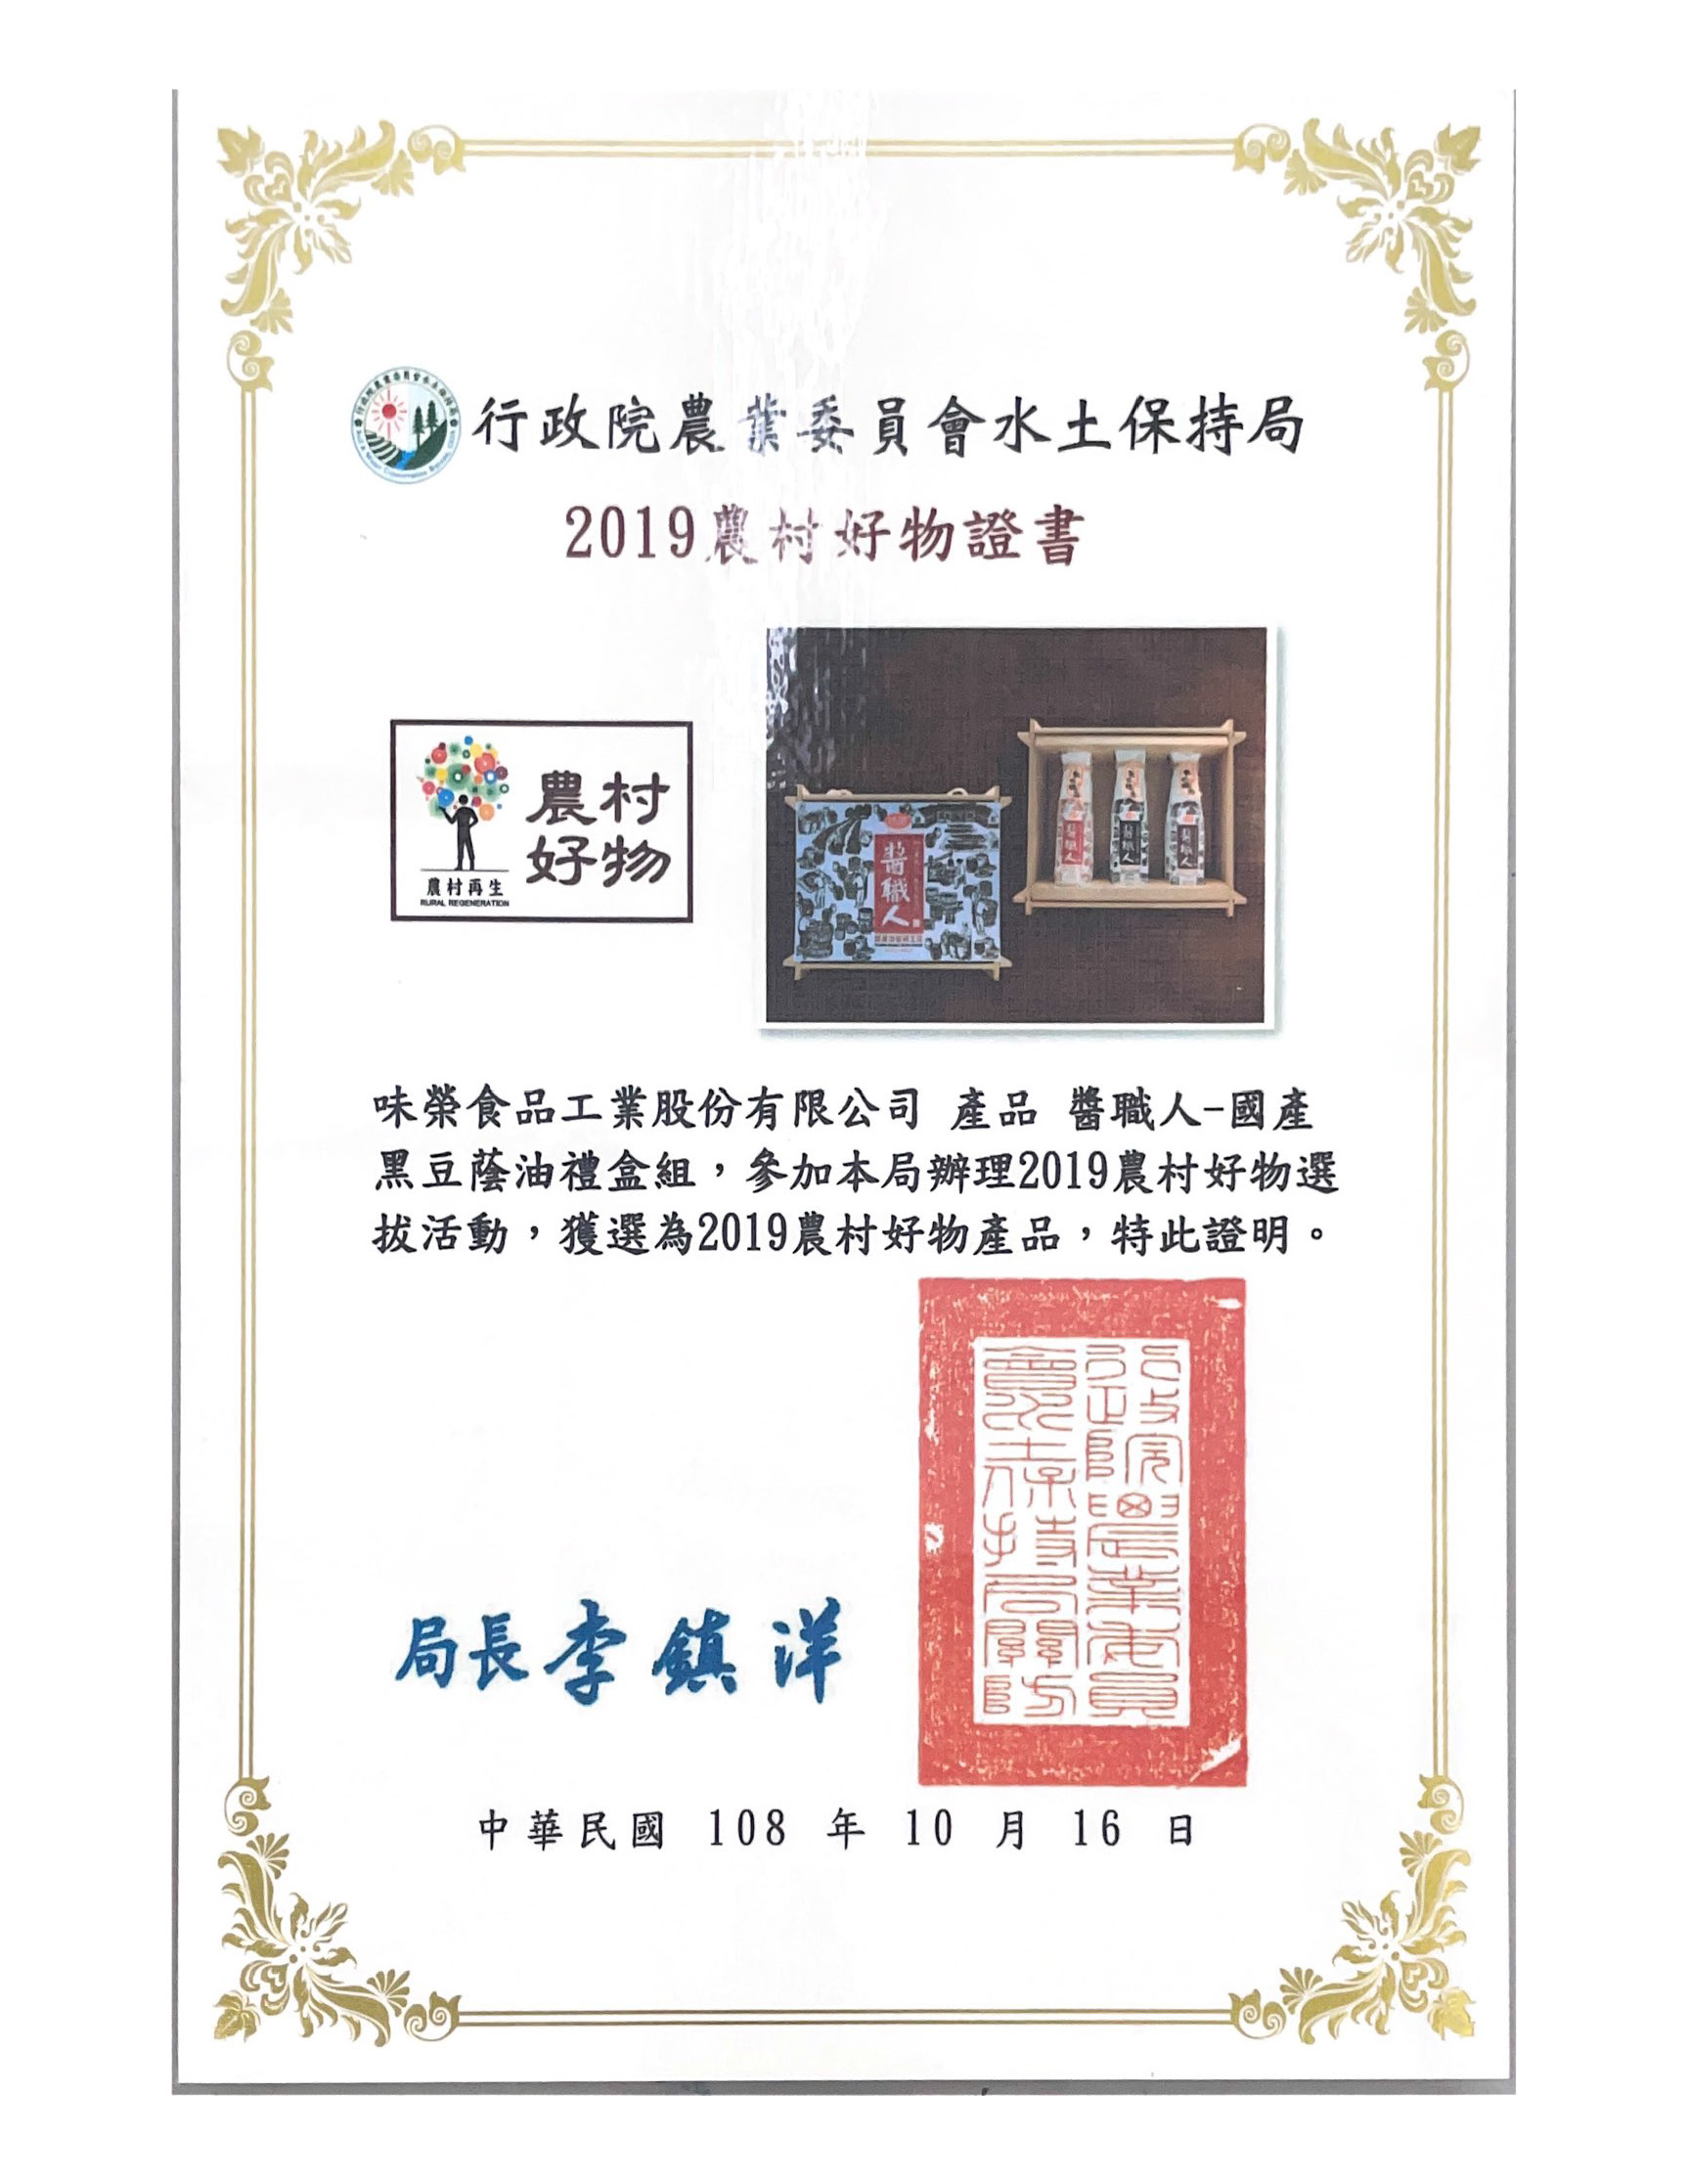 [Sauce Craftsman-Domestic Black Bean Shade Oil Gift Box Set] Passed the "Rural Goods" selection by the Bureau of Soil and Water Conservation, Council of Agriculture, Executive Yuan